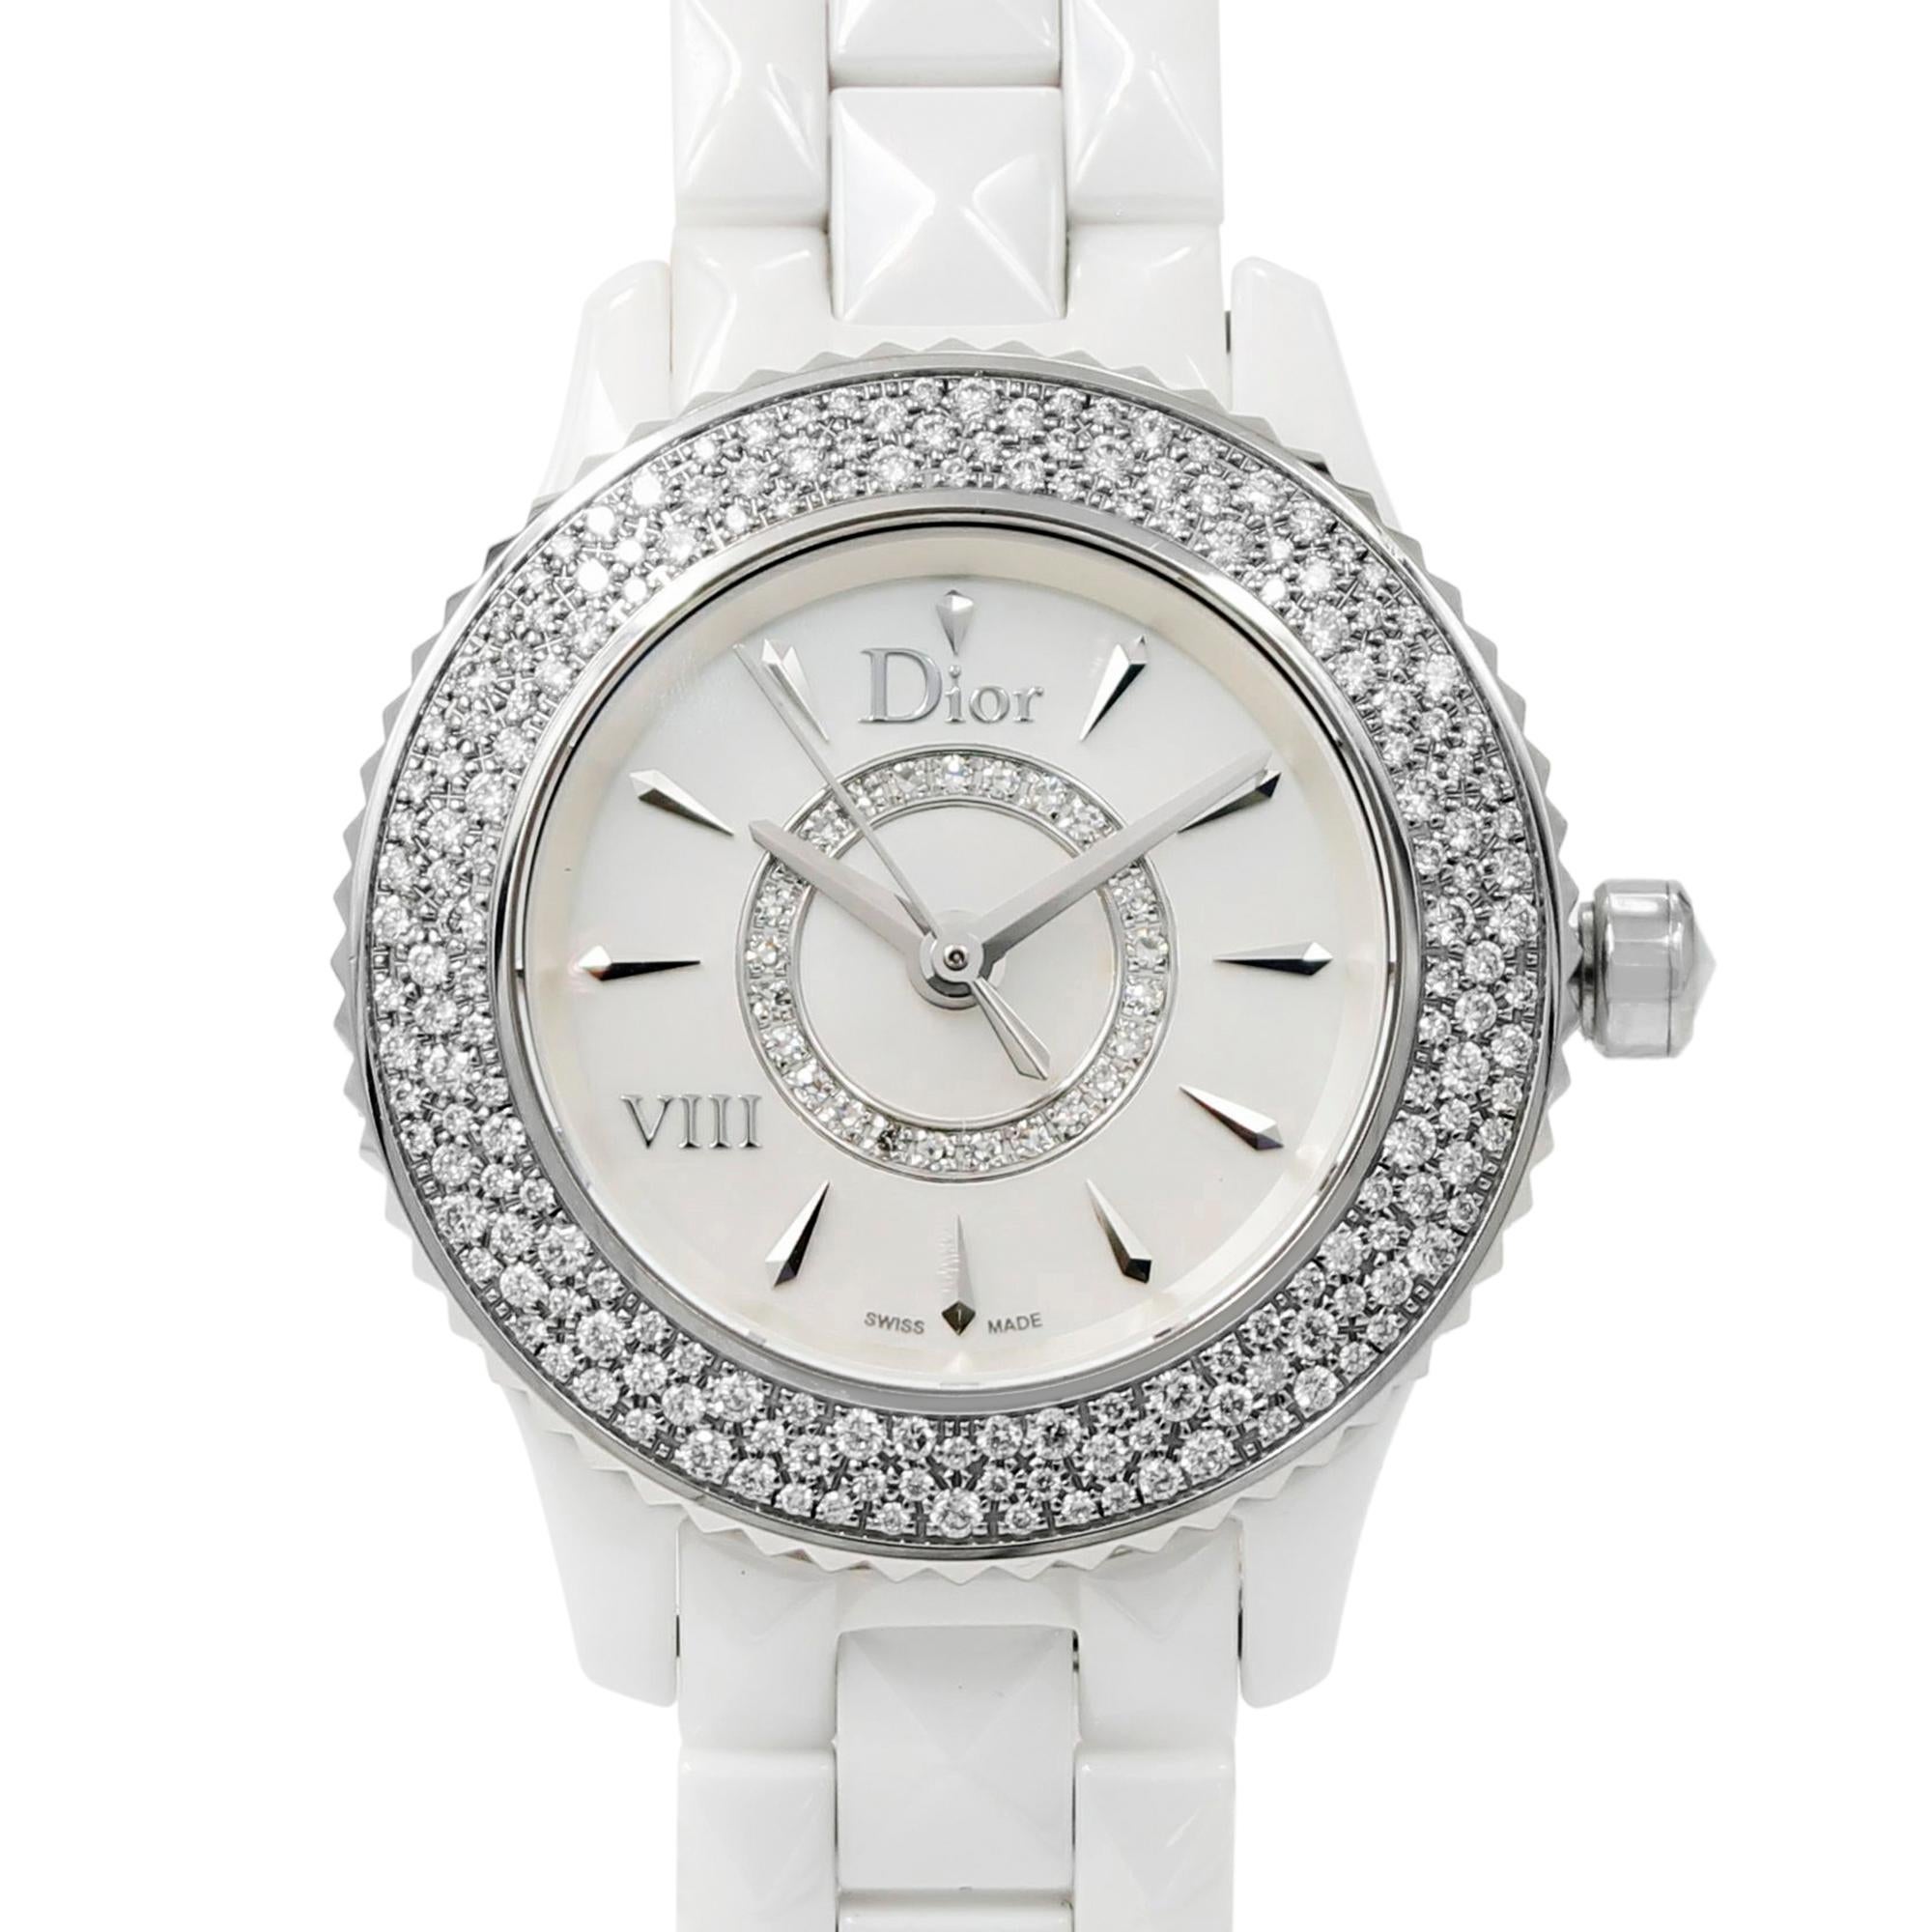 This New With Defects Christian Dior VIII CD1221E4C001 is a beautiful Ladies timepiece that is powered by a quartz movement which is cased in a ceramic case. It has a round shape face, diamonds dial and has hand sticks style markers. It is completed